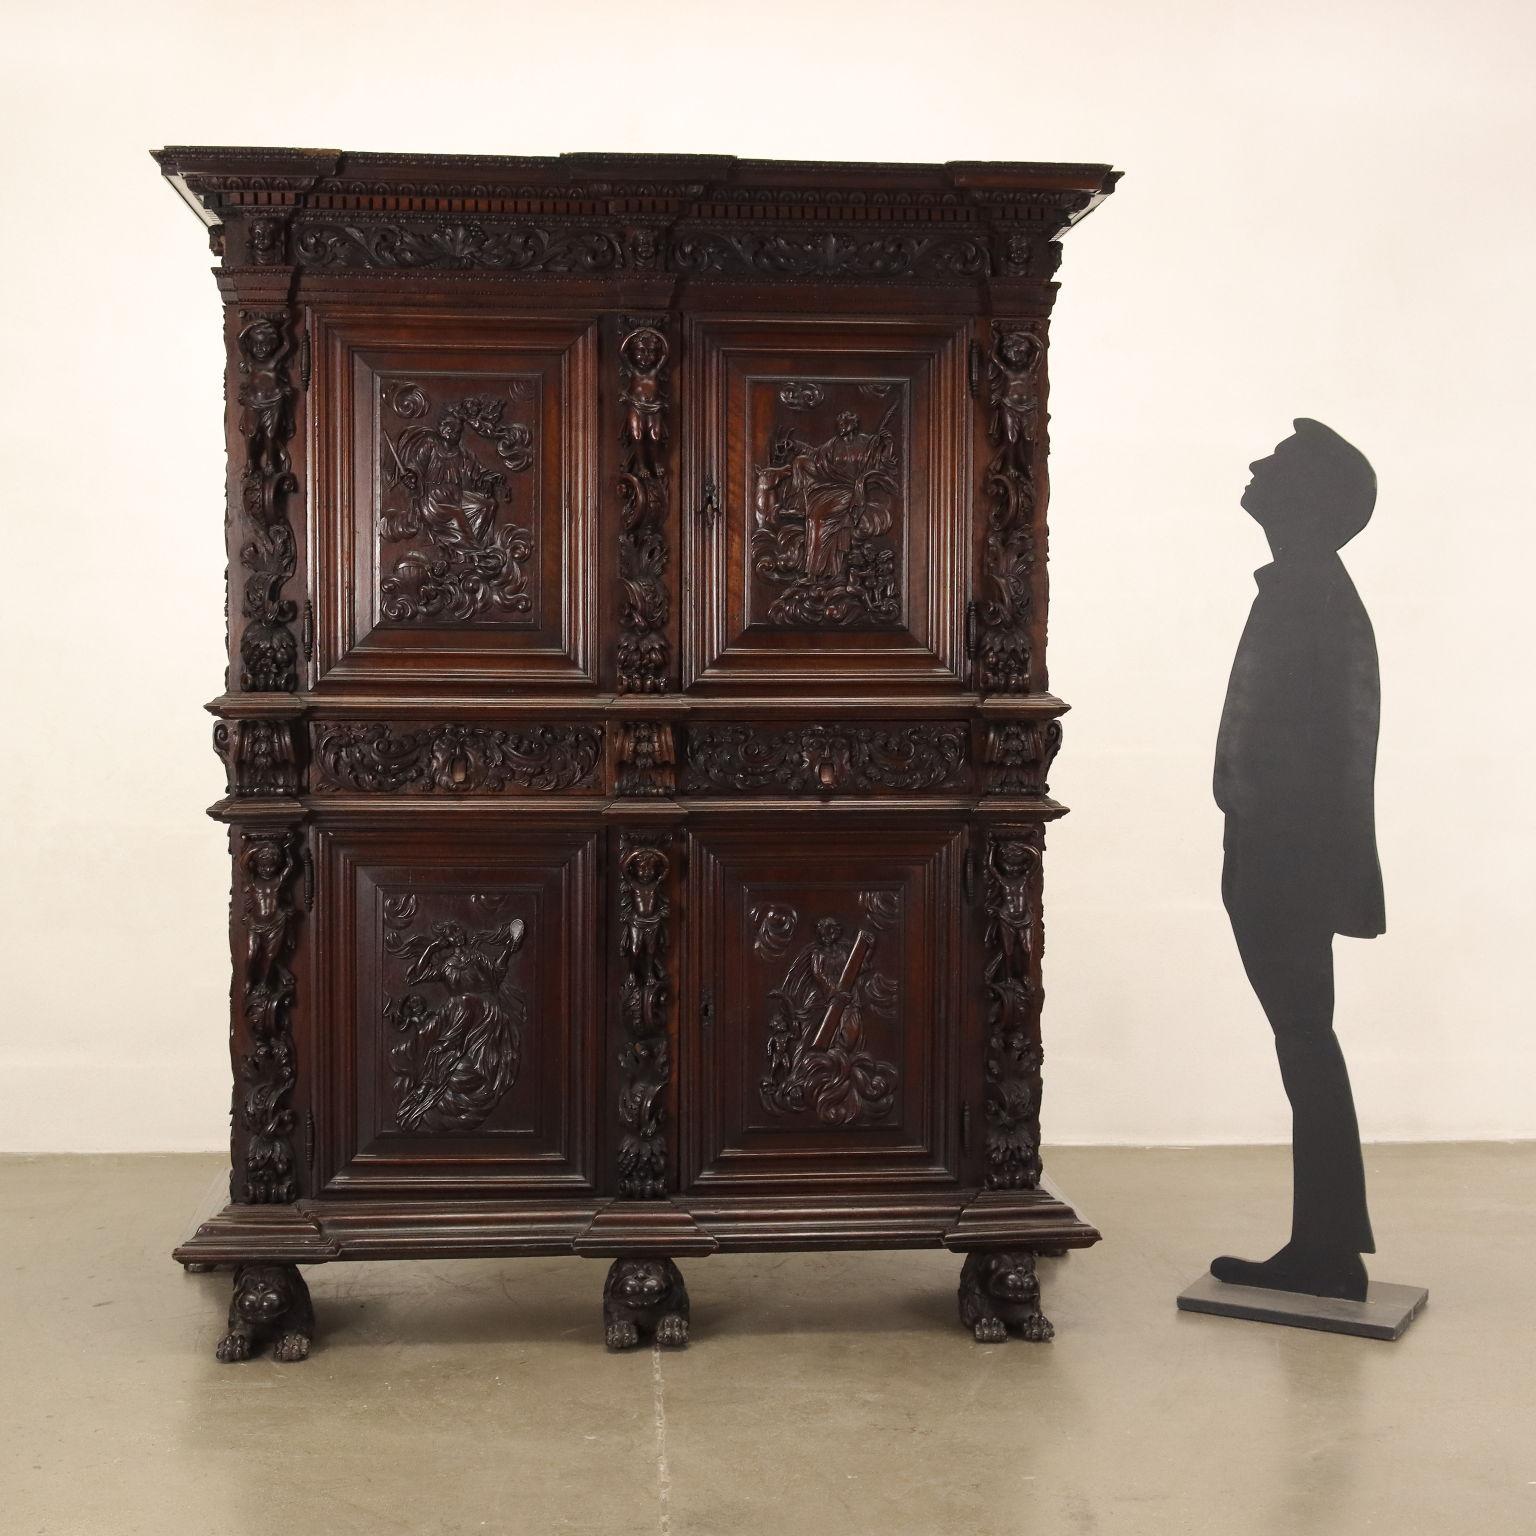 Louis XIV style sideboard supported by feet with lion features, has two doors surmounted by as many drawers and two other doors in the upper body. In walnut, it is entirely carved with leaf motifs and cherubs in the uprights, on the drawers there